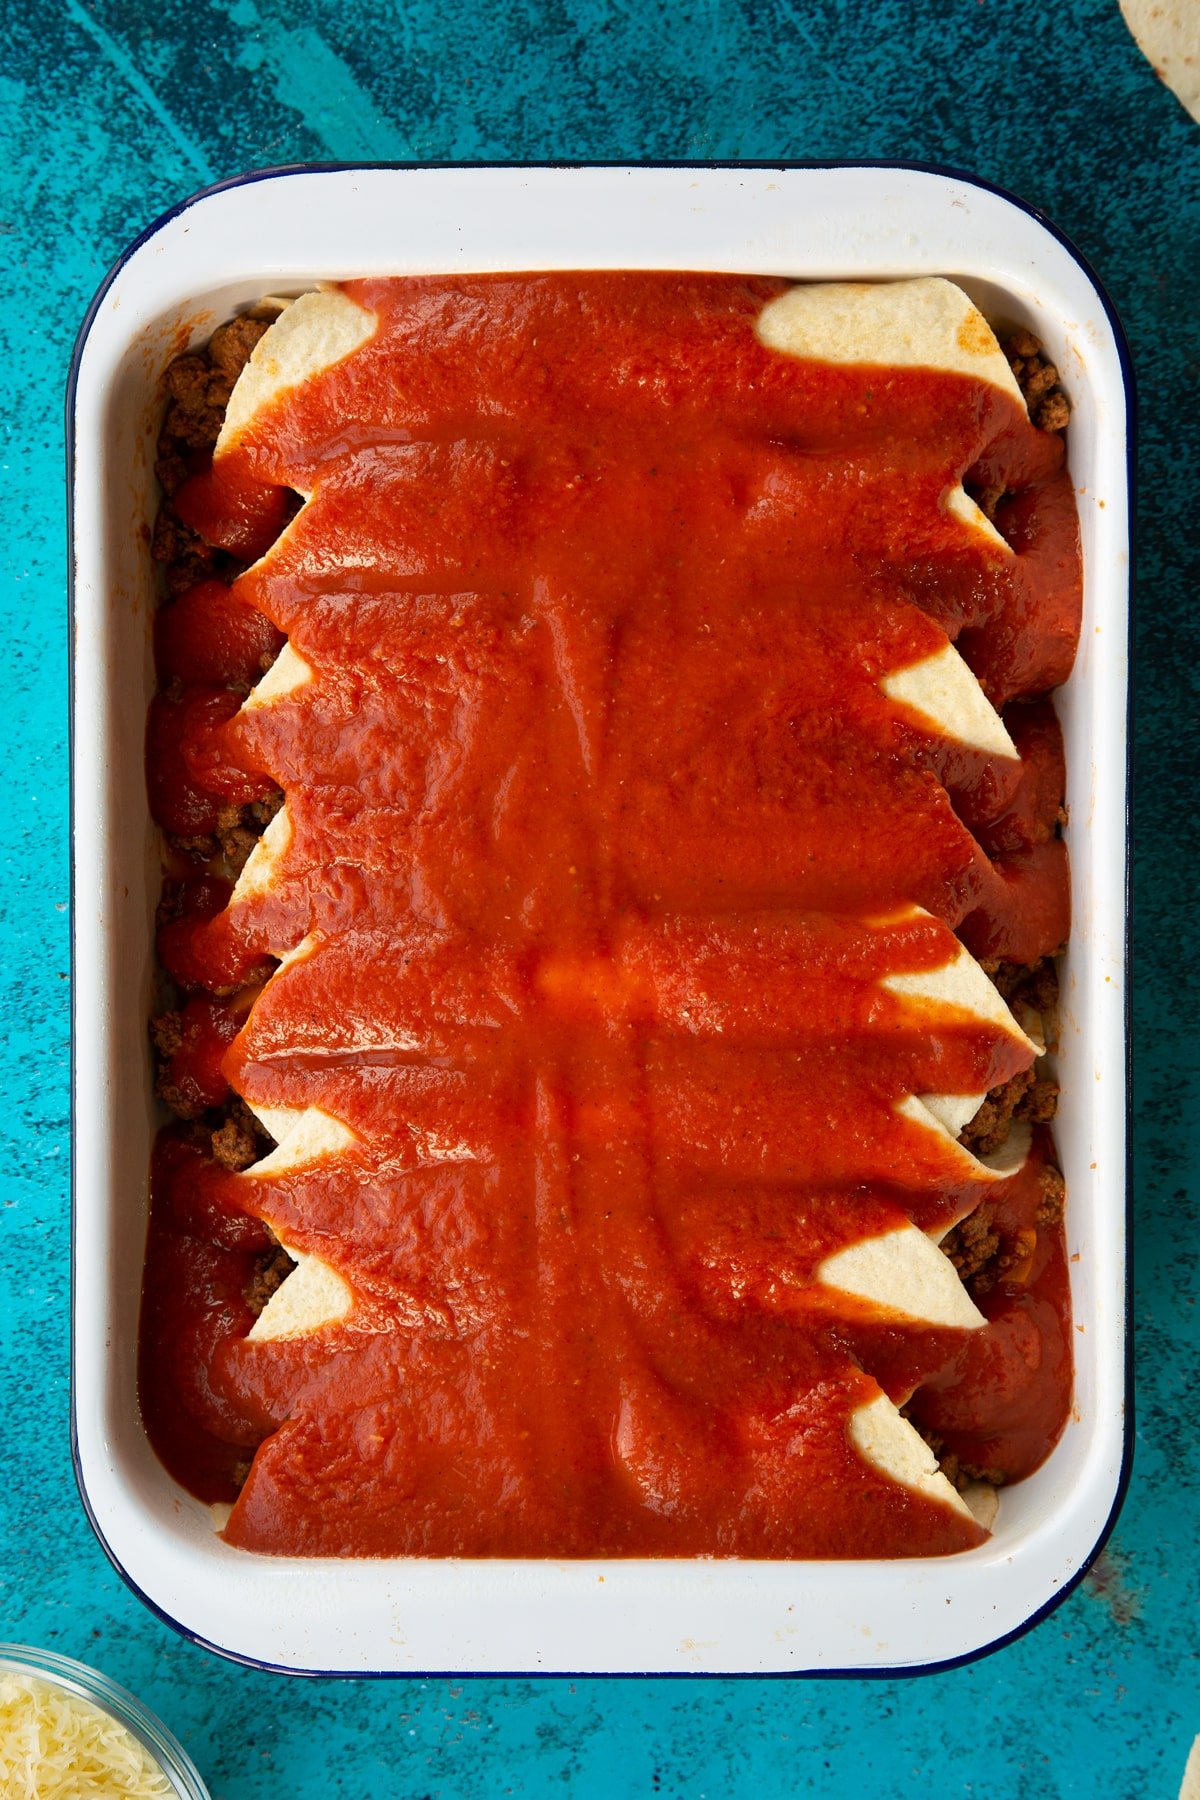 A tray of tortillas filled with Quorn mince enchilada filling, with enchilada sauce on top.